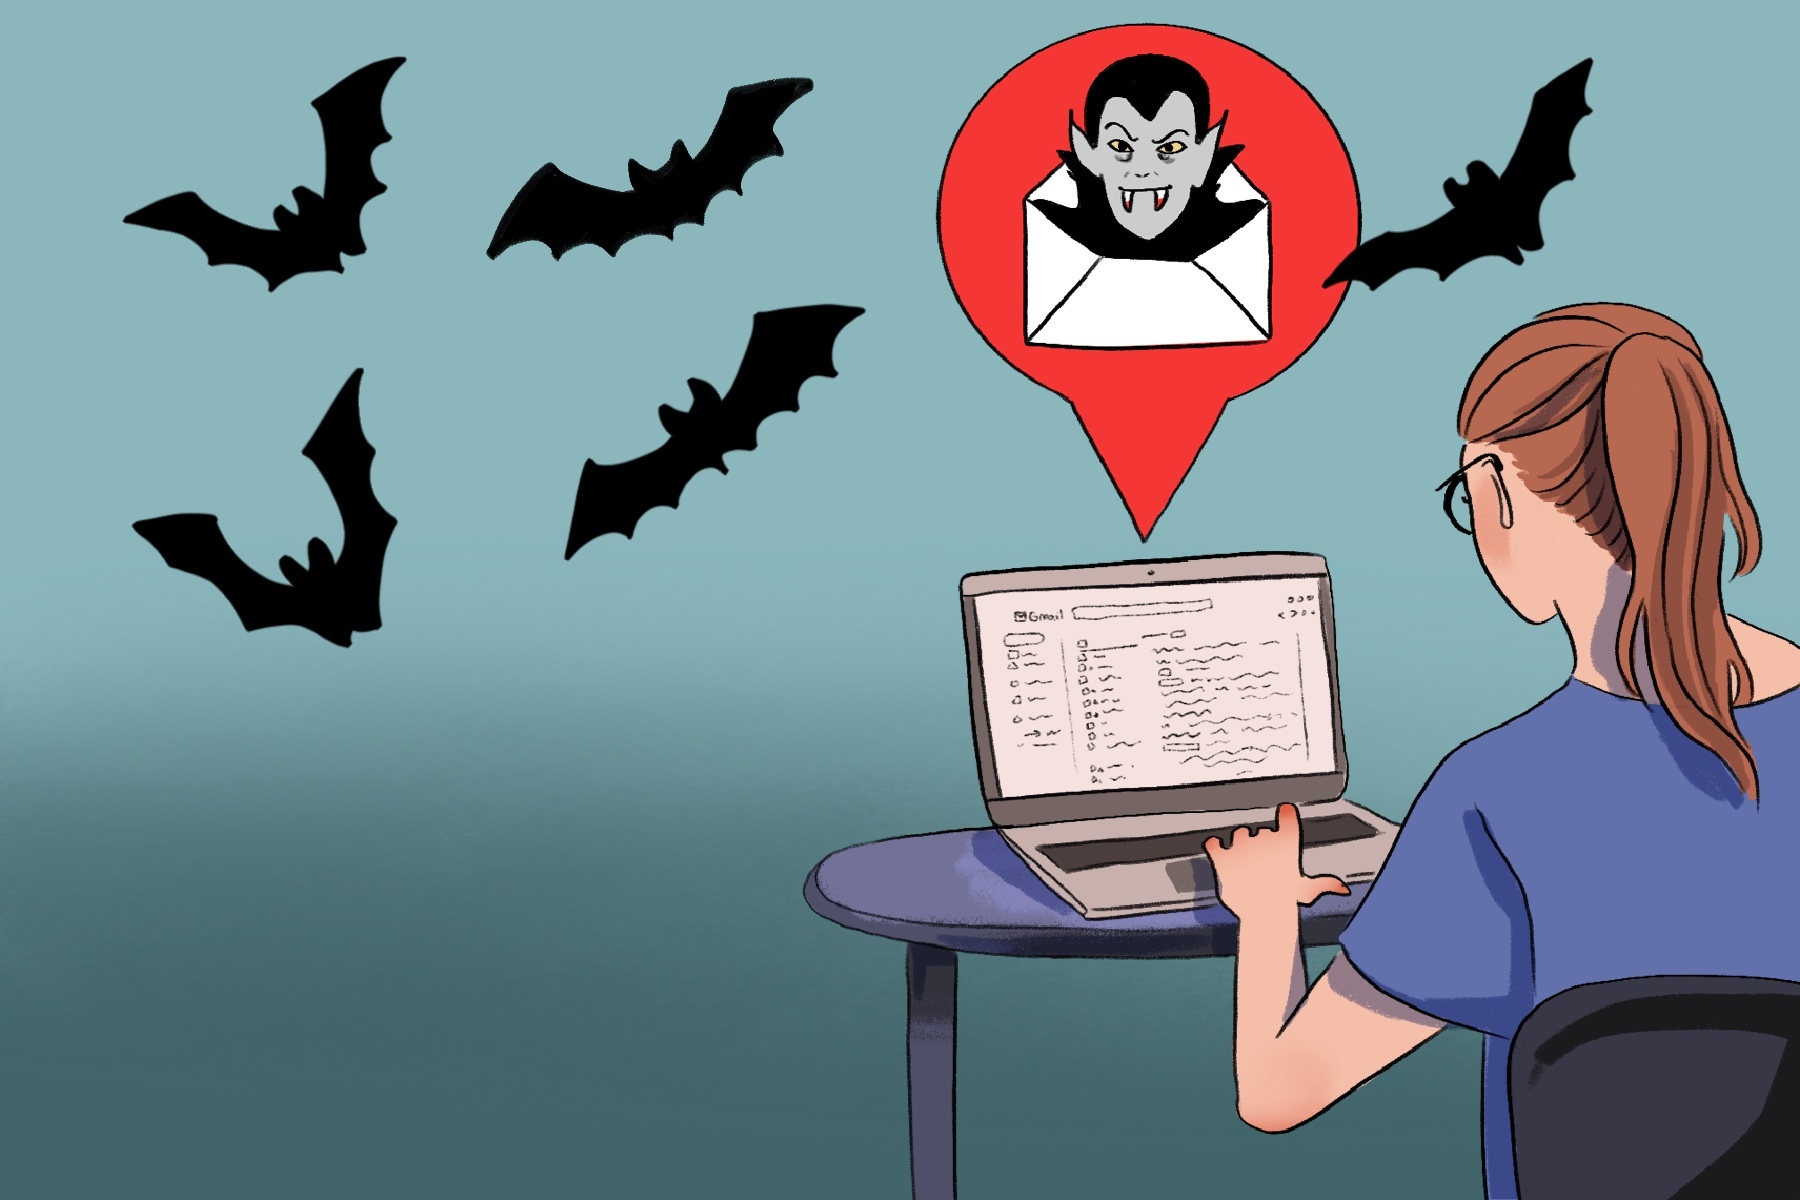 A drawing shows dracula popping out of a girl's computer while bats fly in the background.